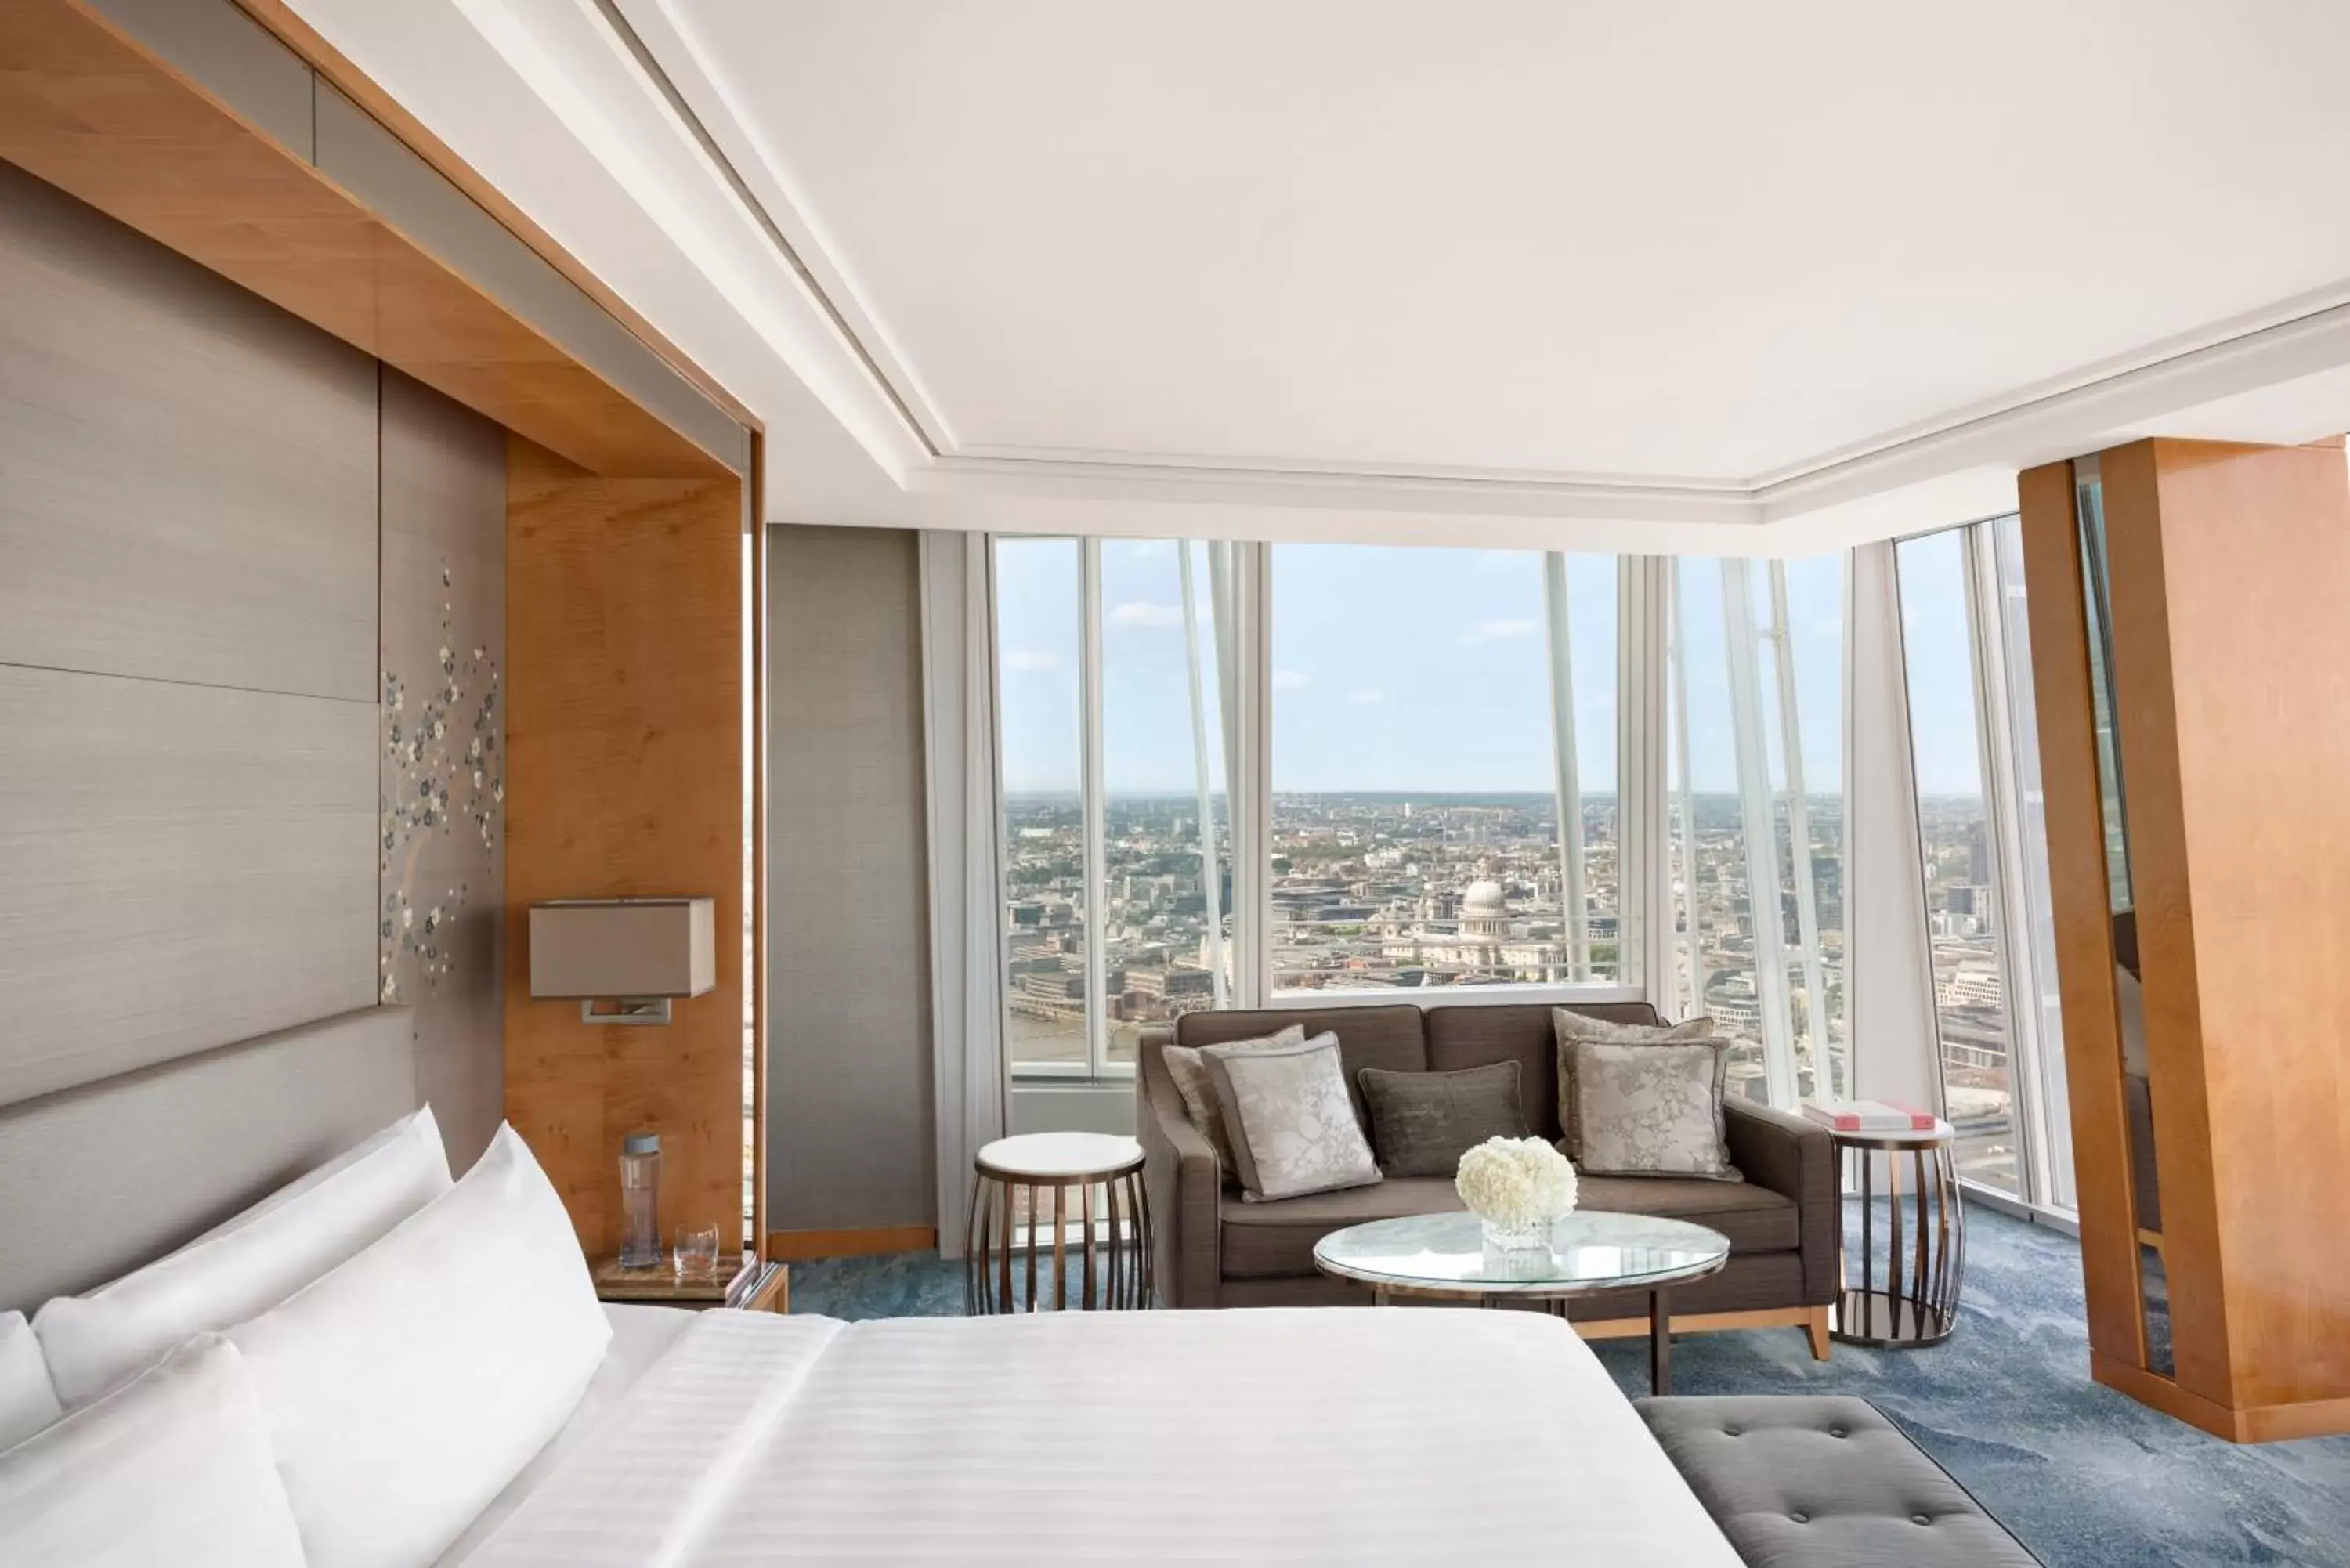 Iconic King Room With City View in Shangri-La The Shard, London